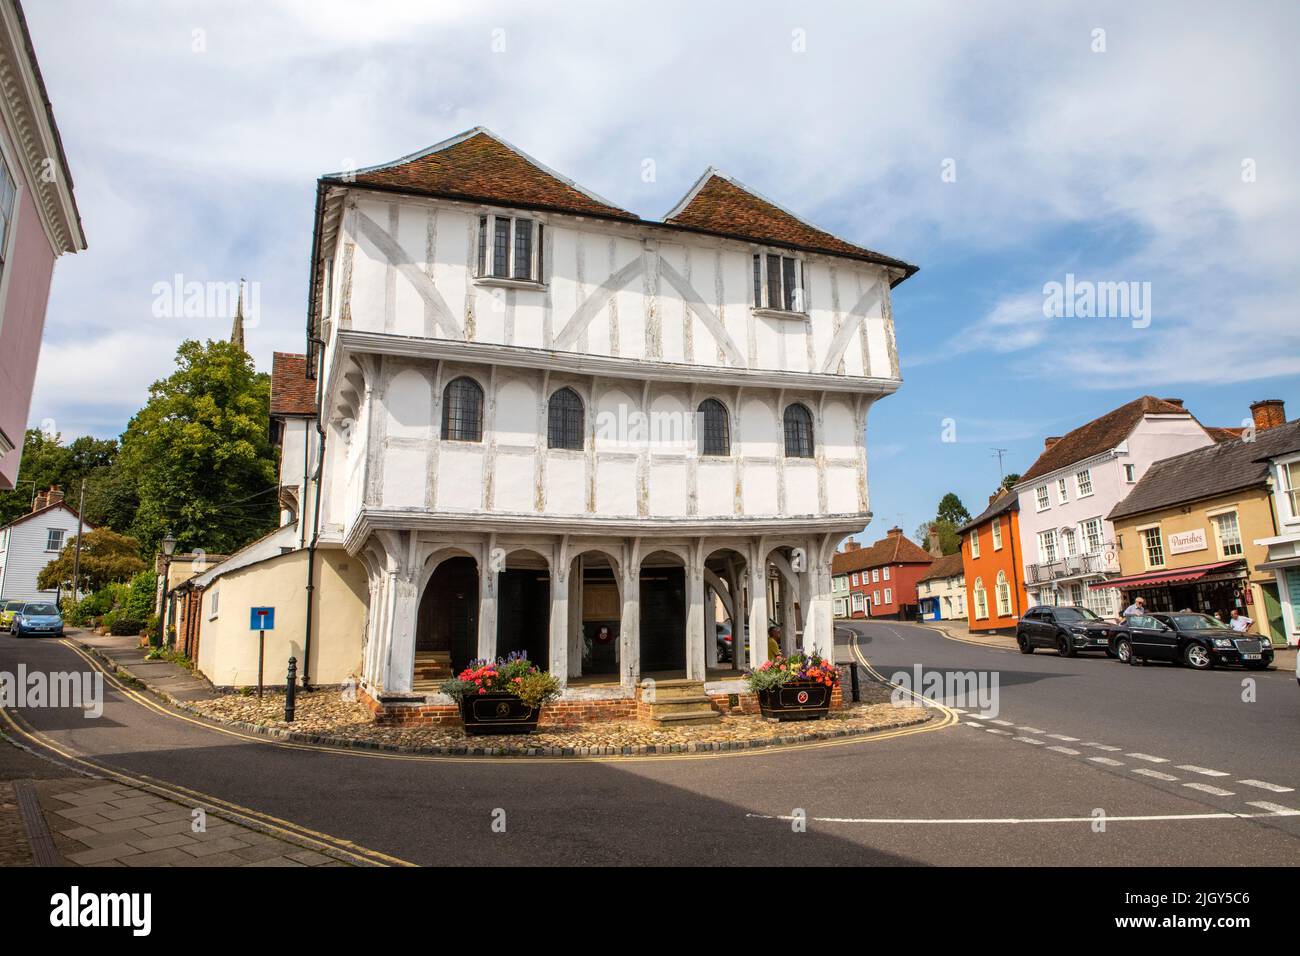 Essex, UK - September 6th 2021: A view of the historic Thaxted Guildhall, in the picturesque town of Thaxted in Essex, UK.  The spire of Thaxted Paris Stock Photo